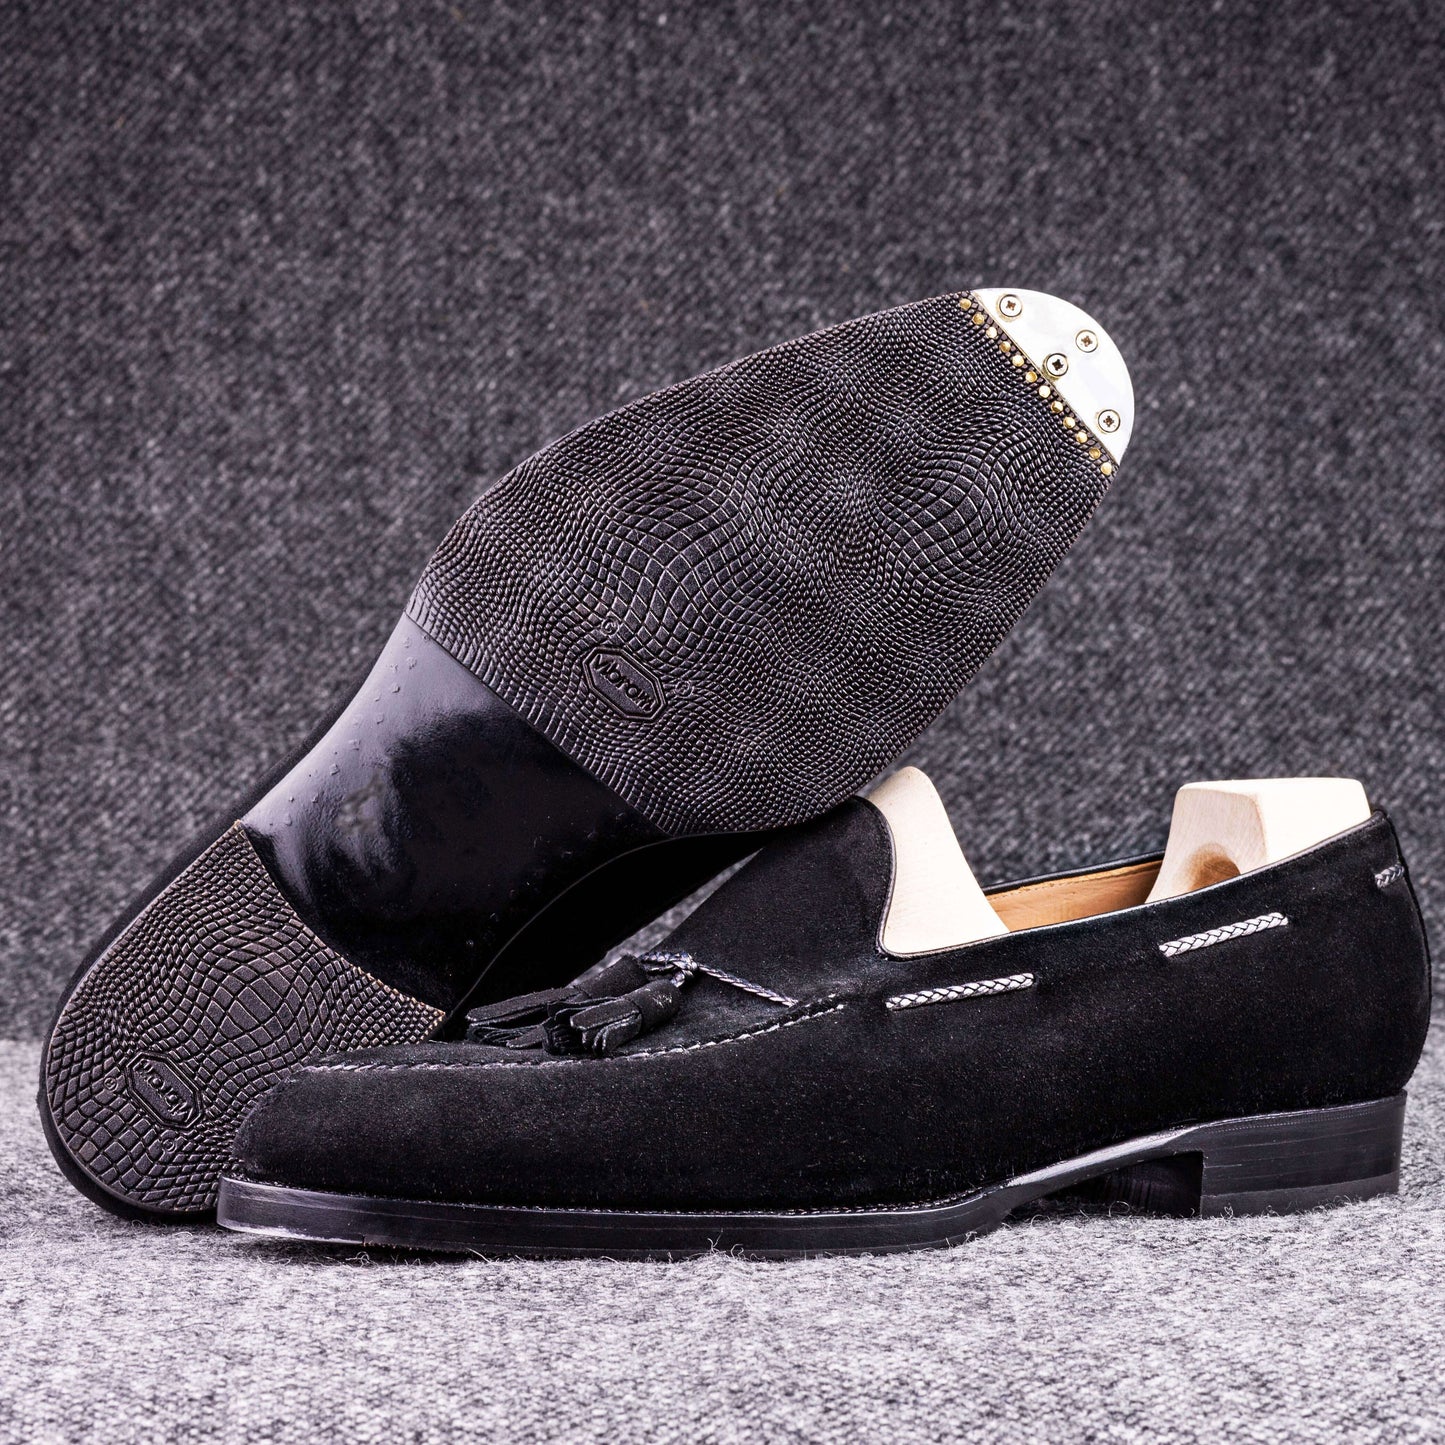 Tassel loafer with hand stitched apron in black suede